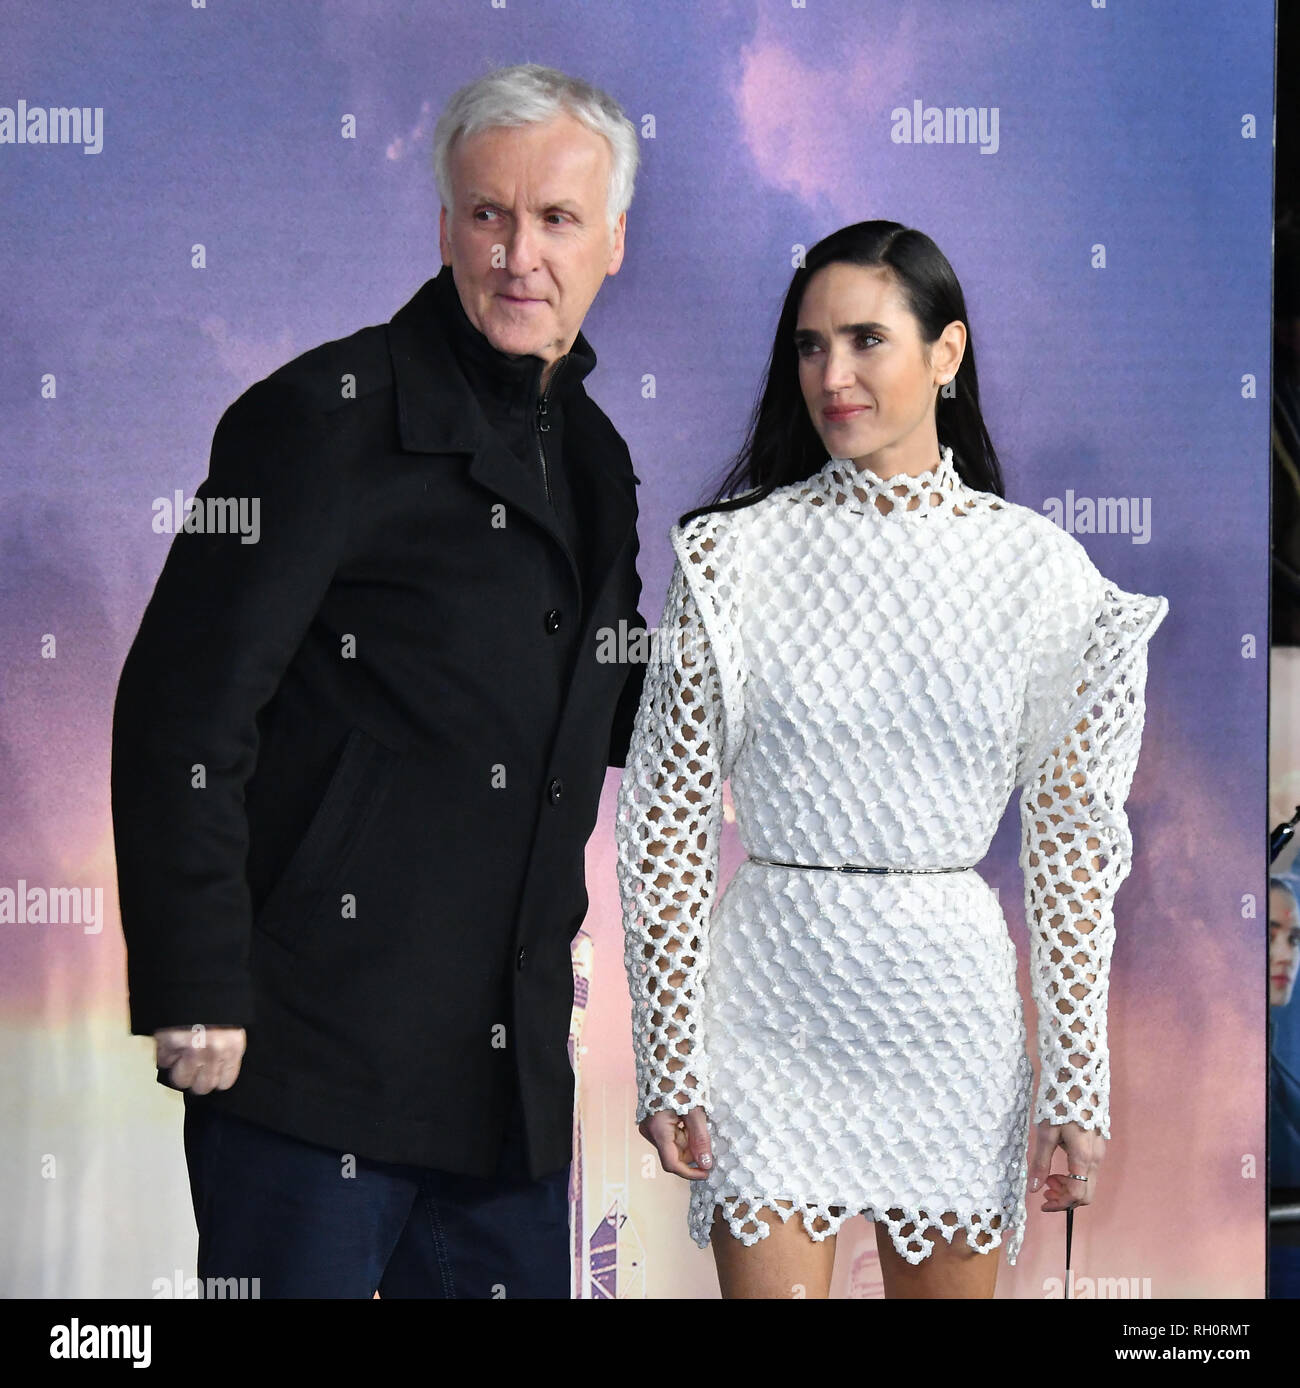 Jennifer Connelly attends the Alita: Battle Angel premiere at Odeon  Leicester Square in London, UK